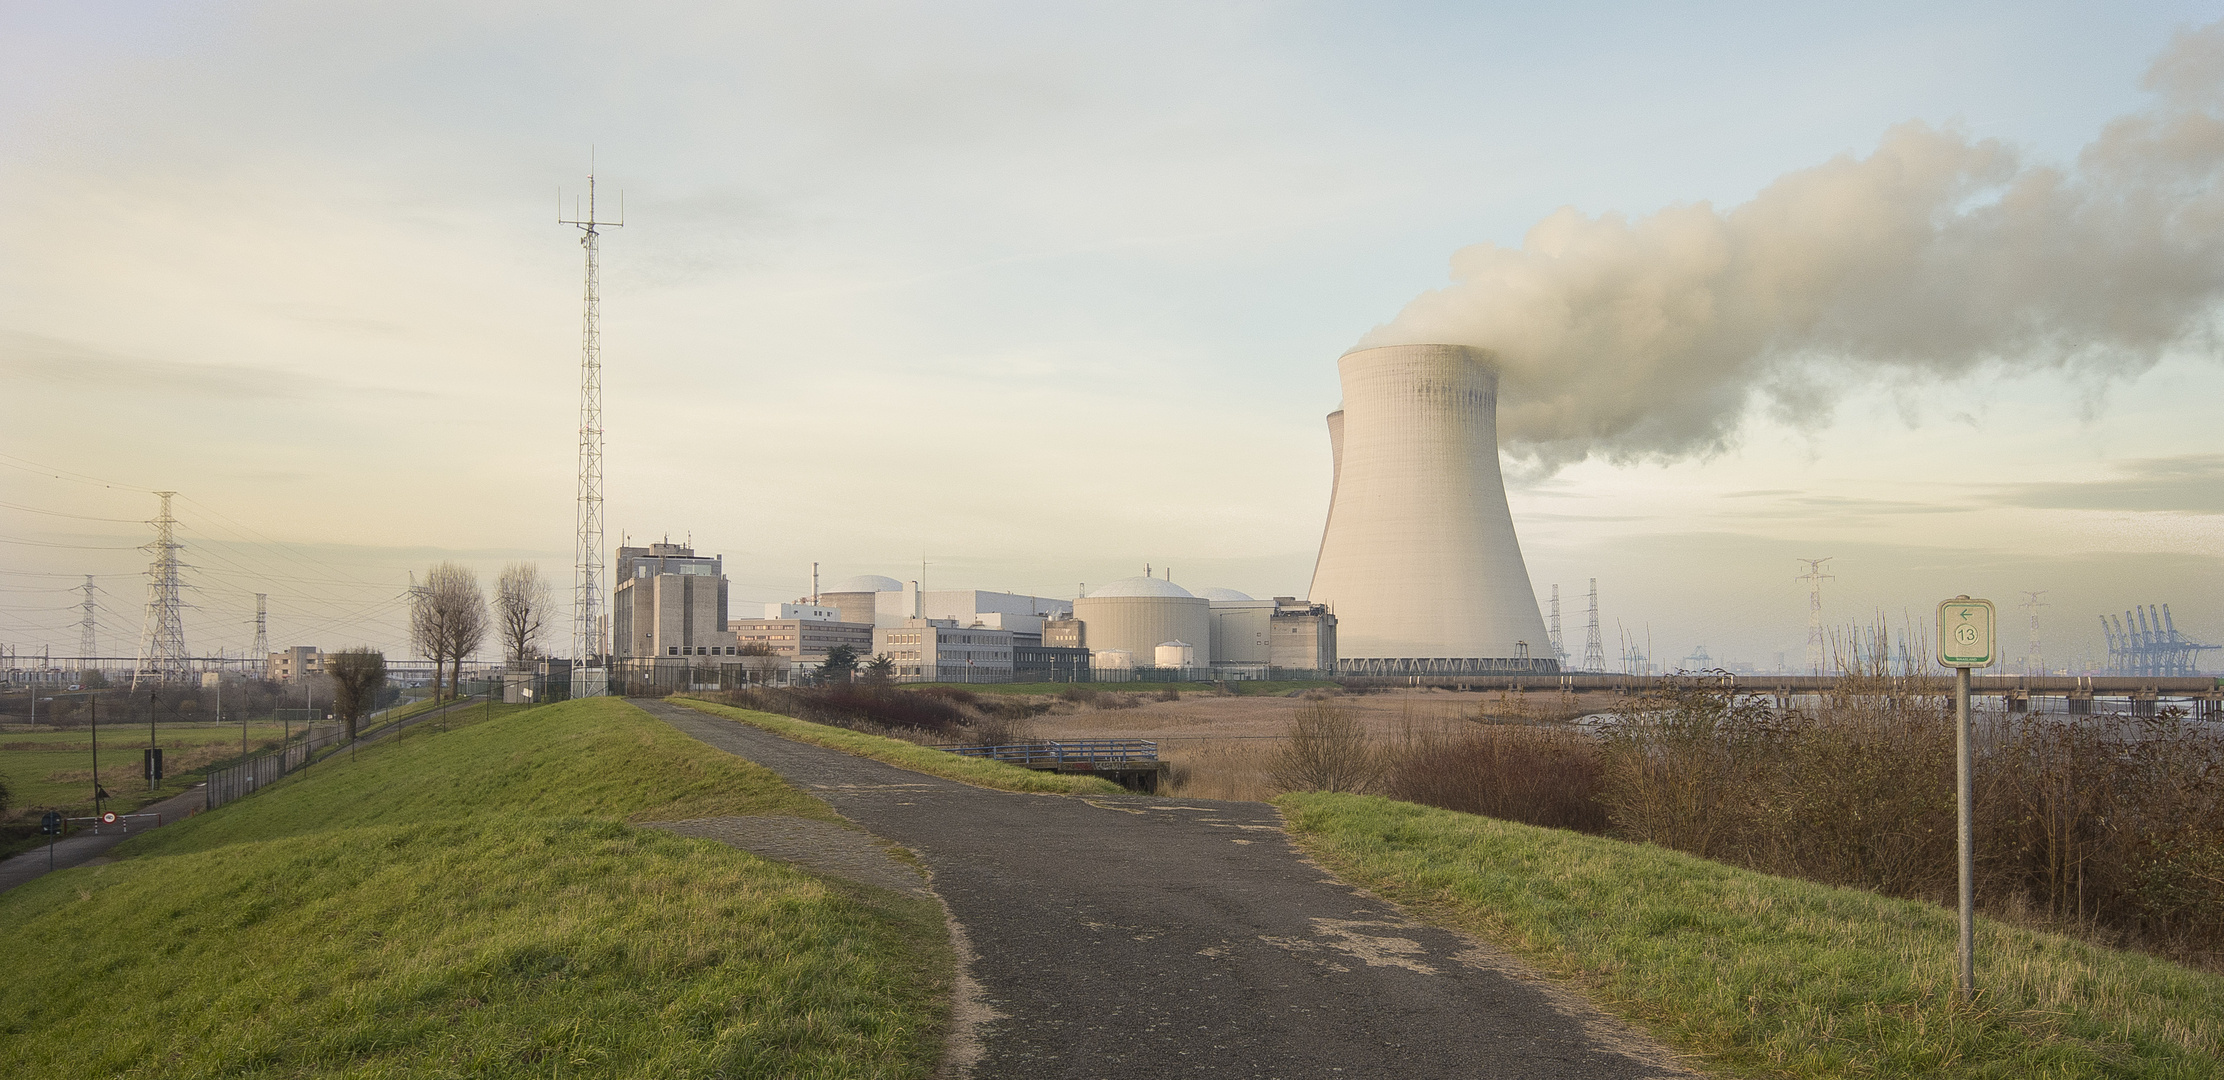 Doel - 134 - Embankment along Schelde River with Cooling Towers of the Nuclear Power Plant